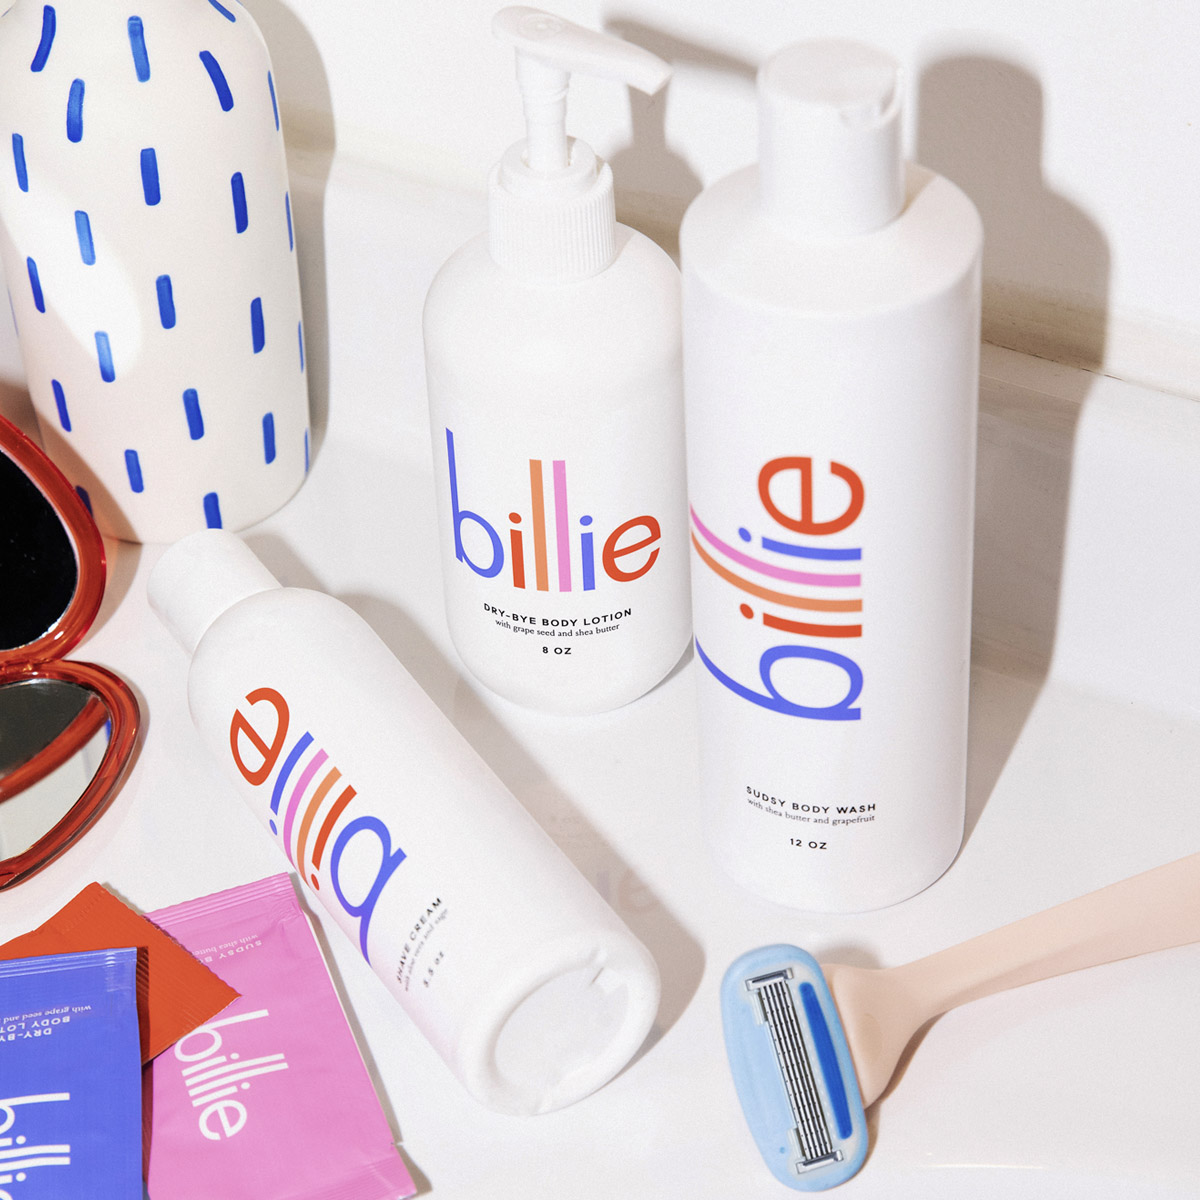 A collection of Billie products. including a razor and body care products